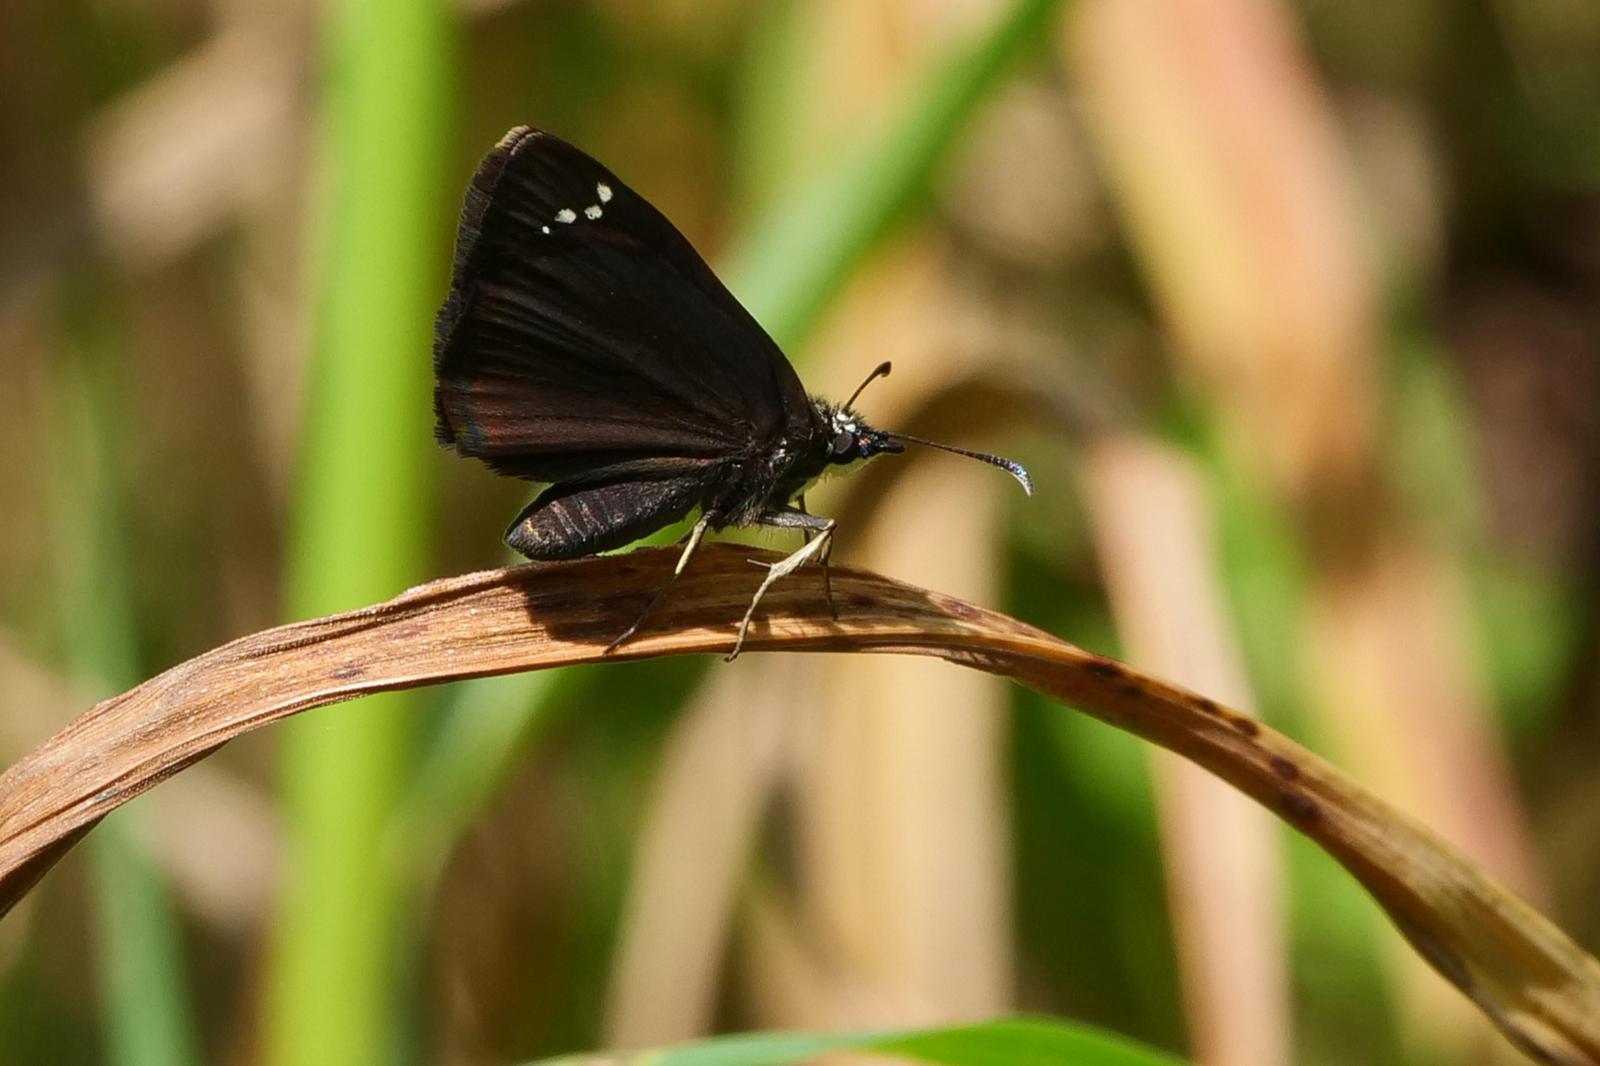 Common Sootywing Photo by Kristy Baker